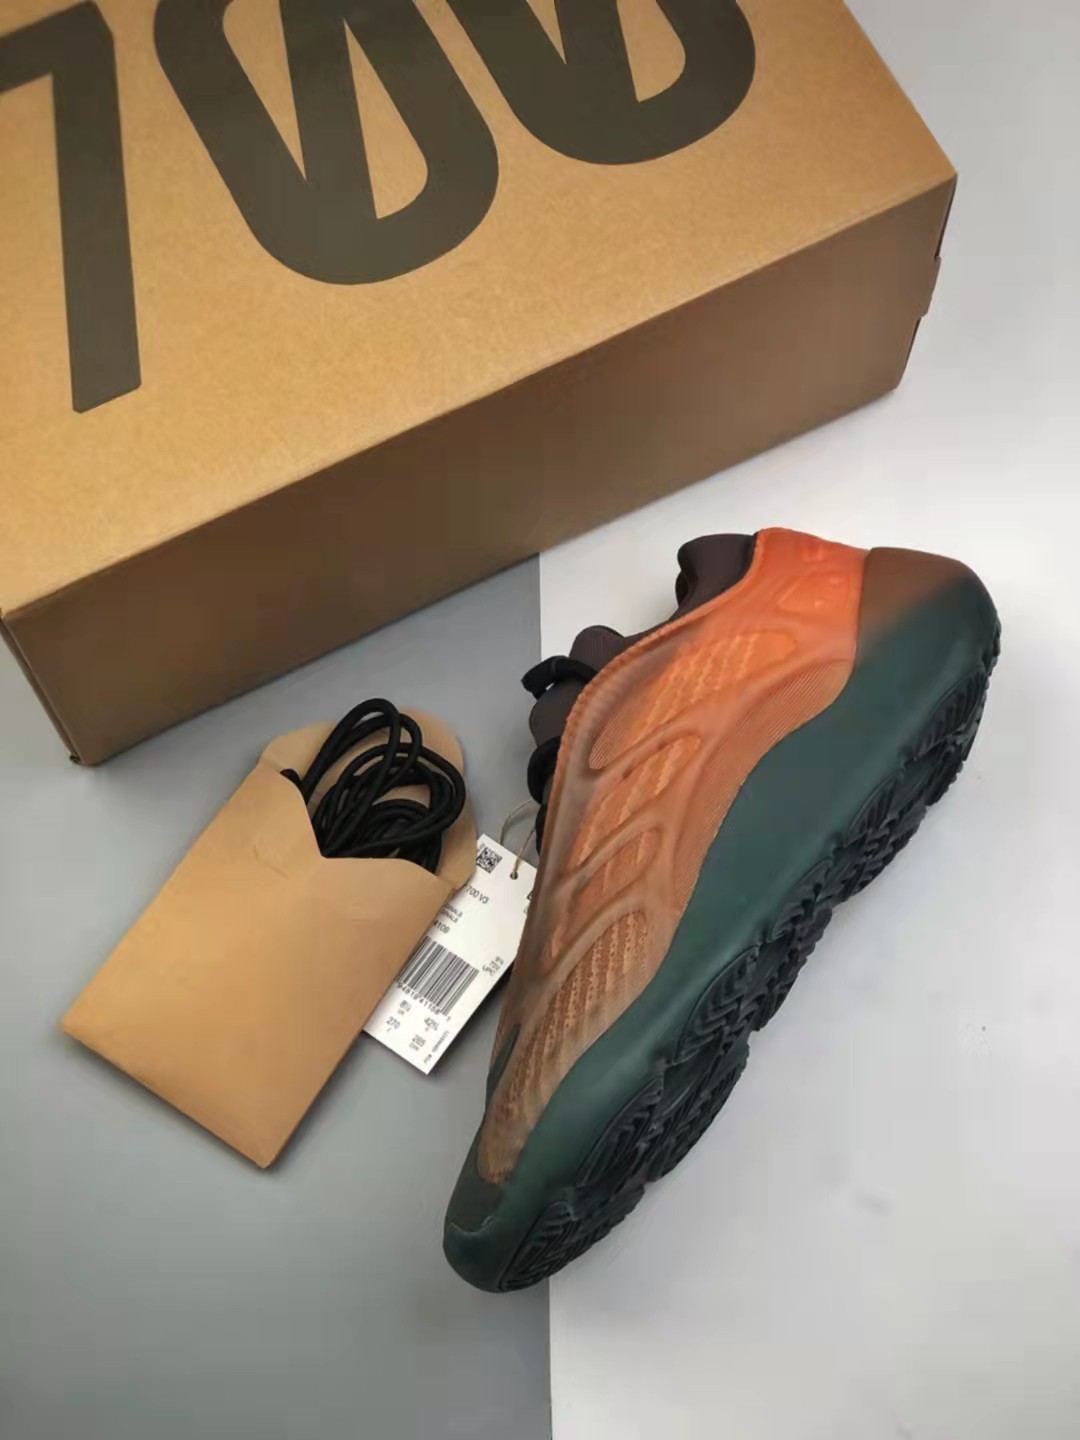 Adidas Yeezy 700 V3 'Copper Fade' GY4109 - Trendy and Stylish Sneakers